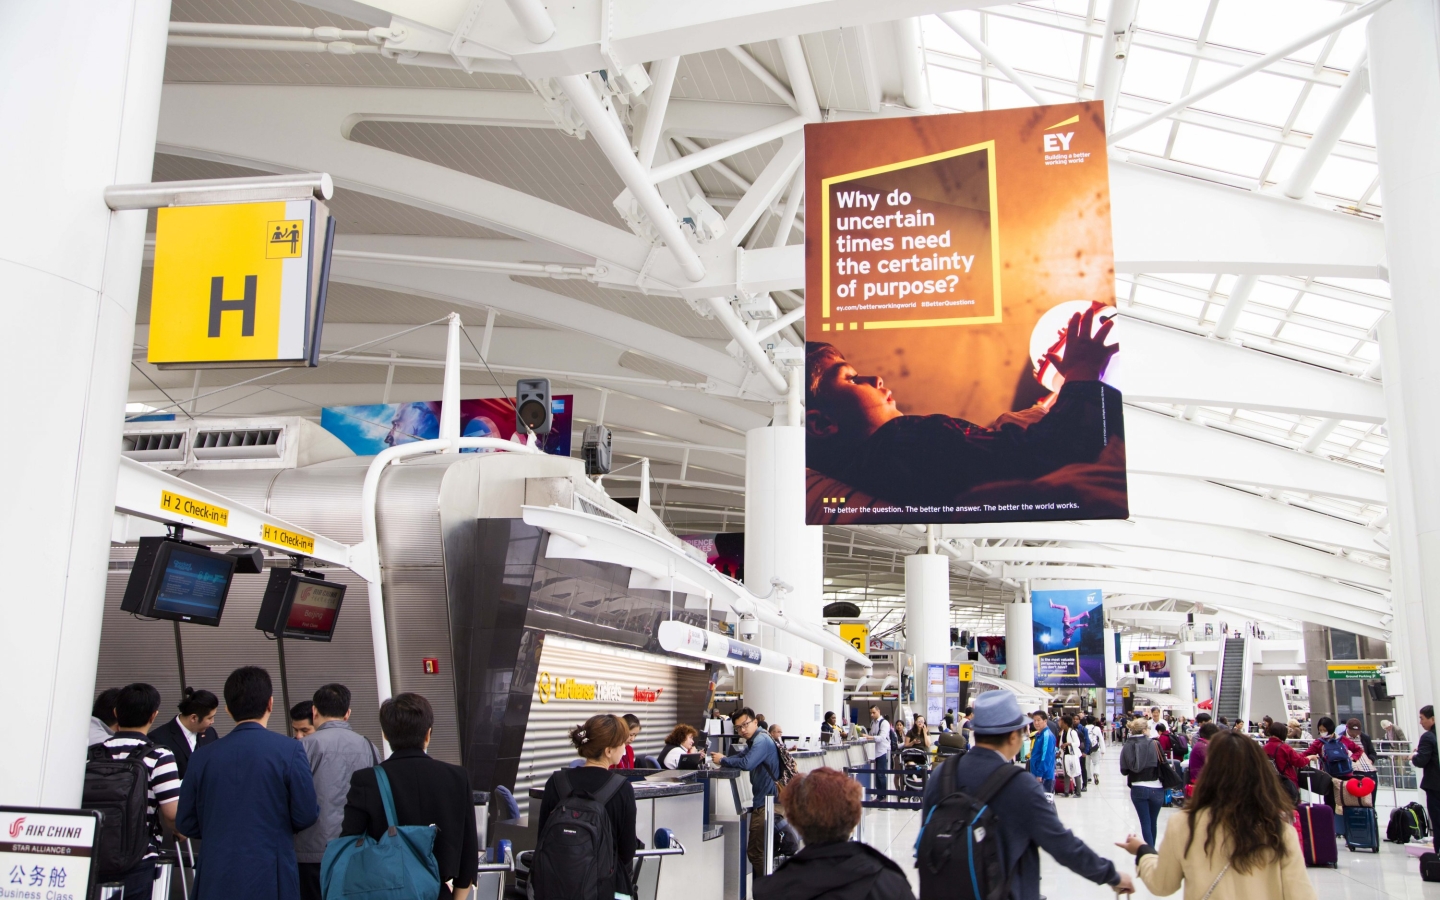 Ernst & Young campaign at USA New York JFK Airport, 2017-05